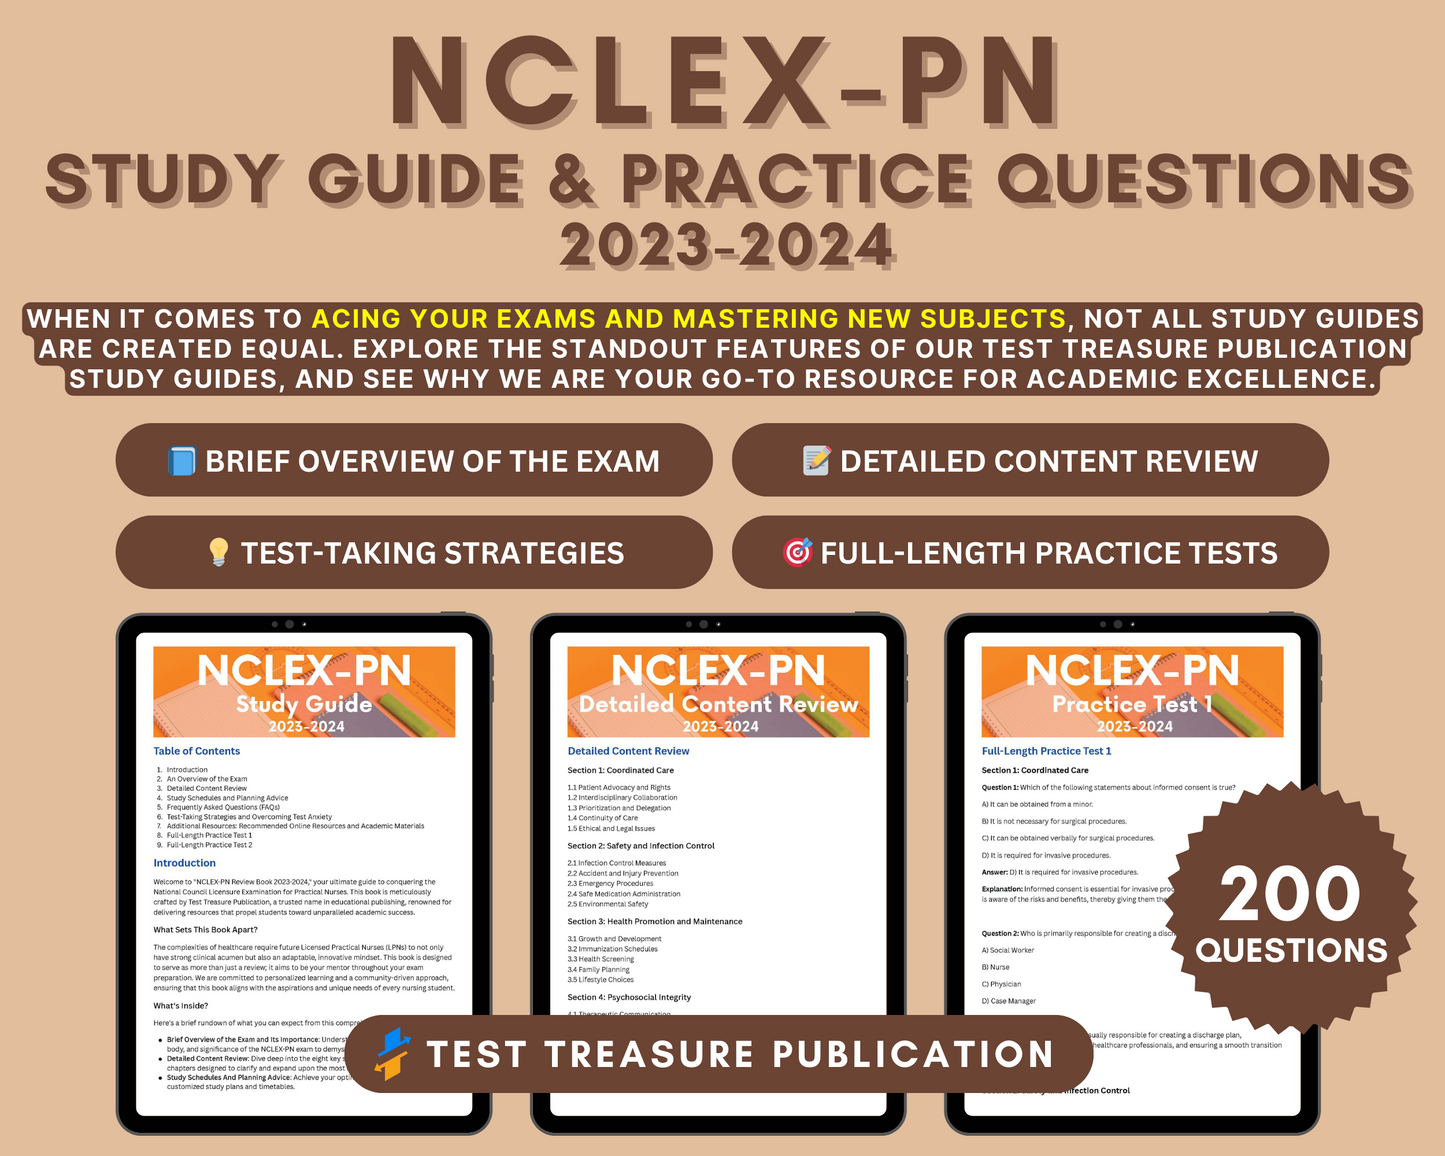 NCLEX-PN Mastery Guide 2023-2024: Your Path to Nursing Success